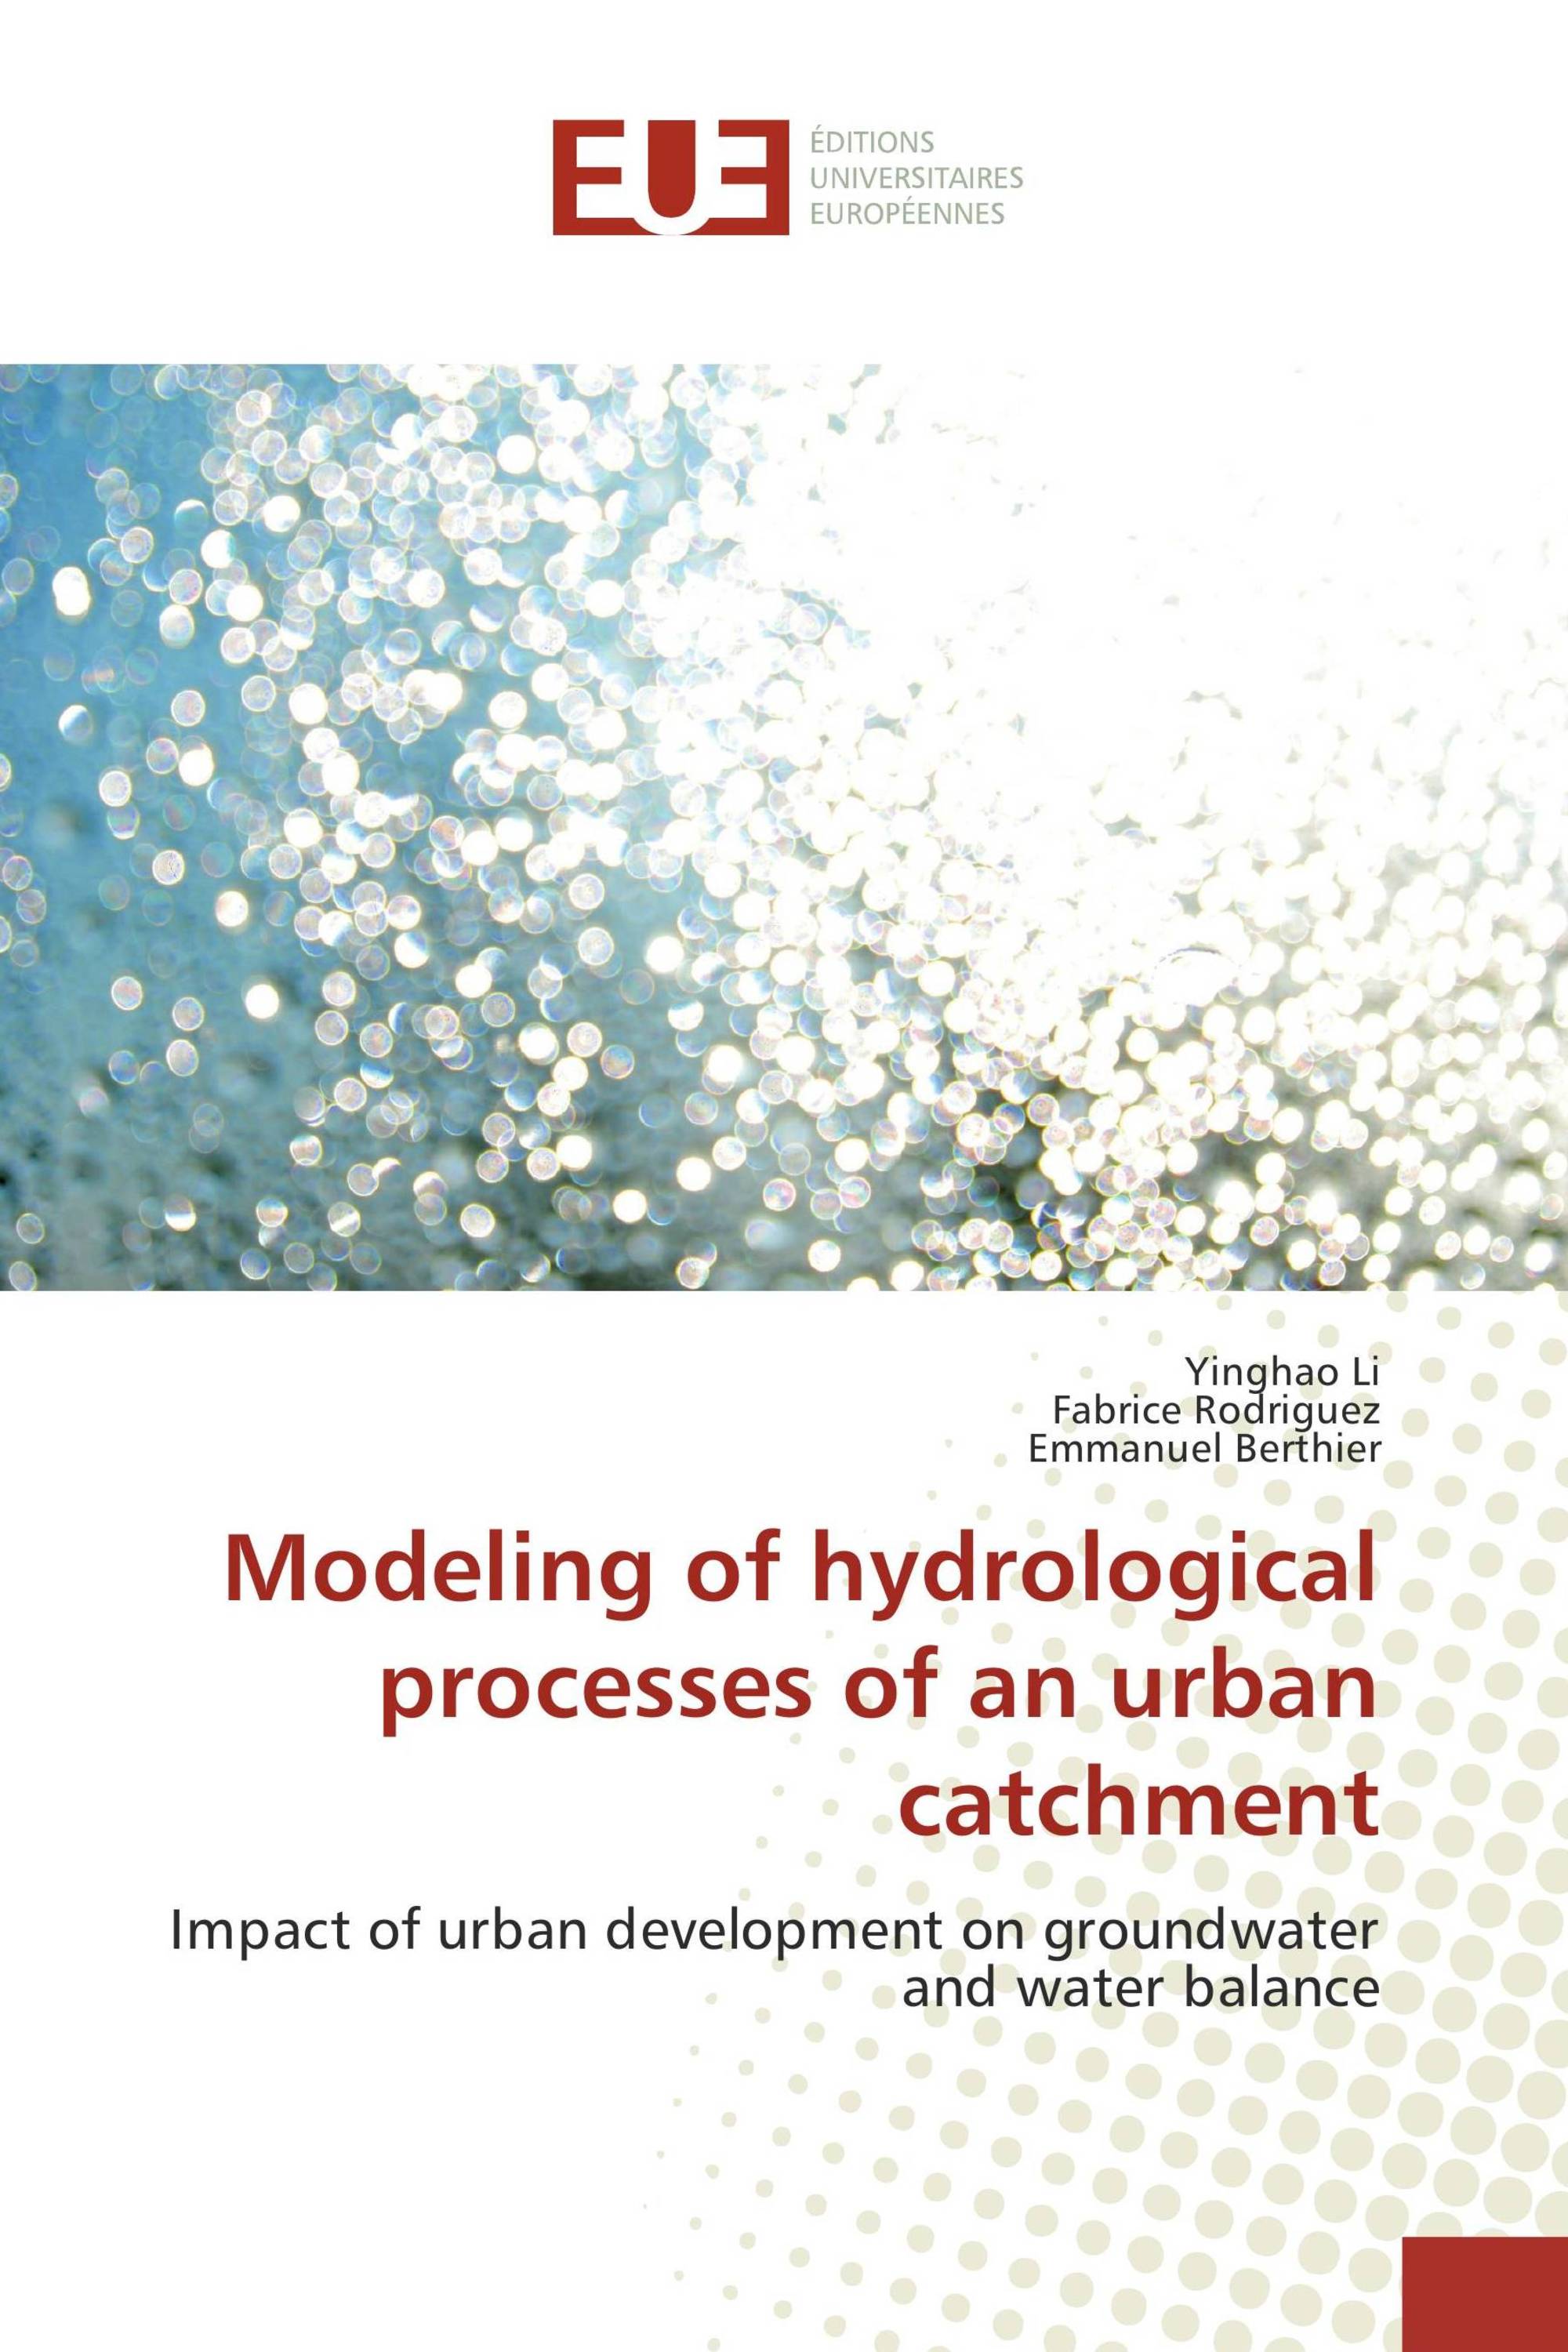 Modeling of hydrological processes of an urban catchment